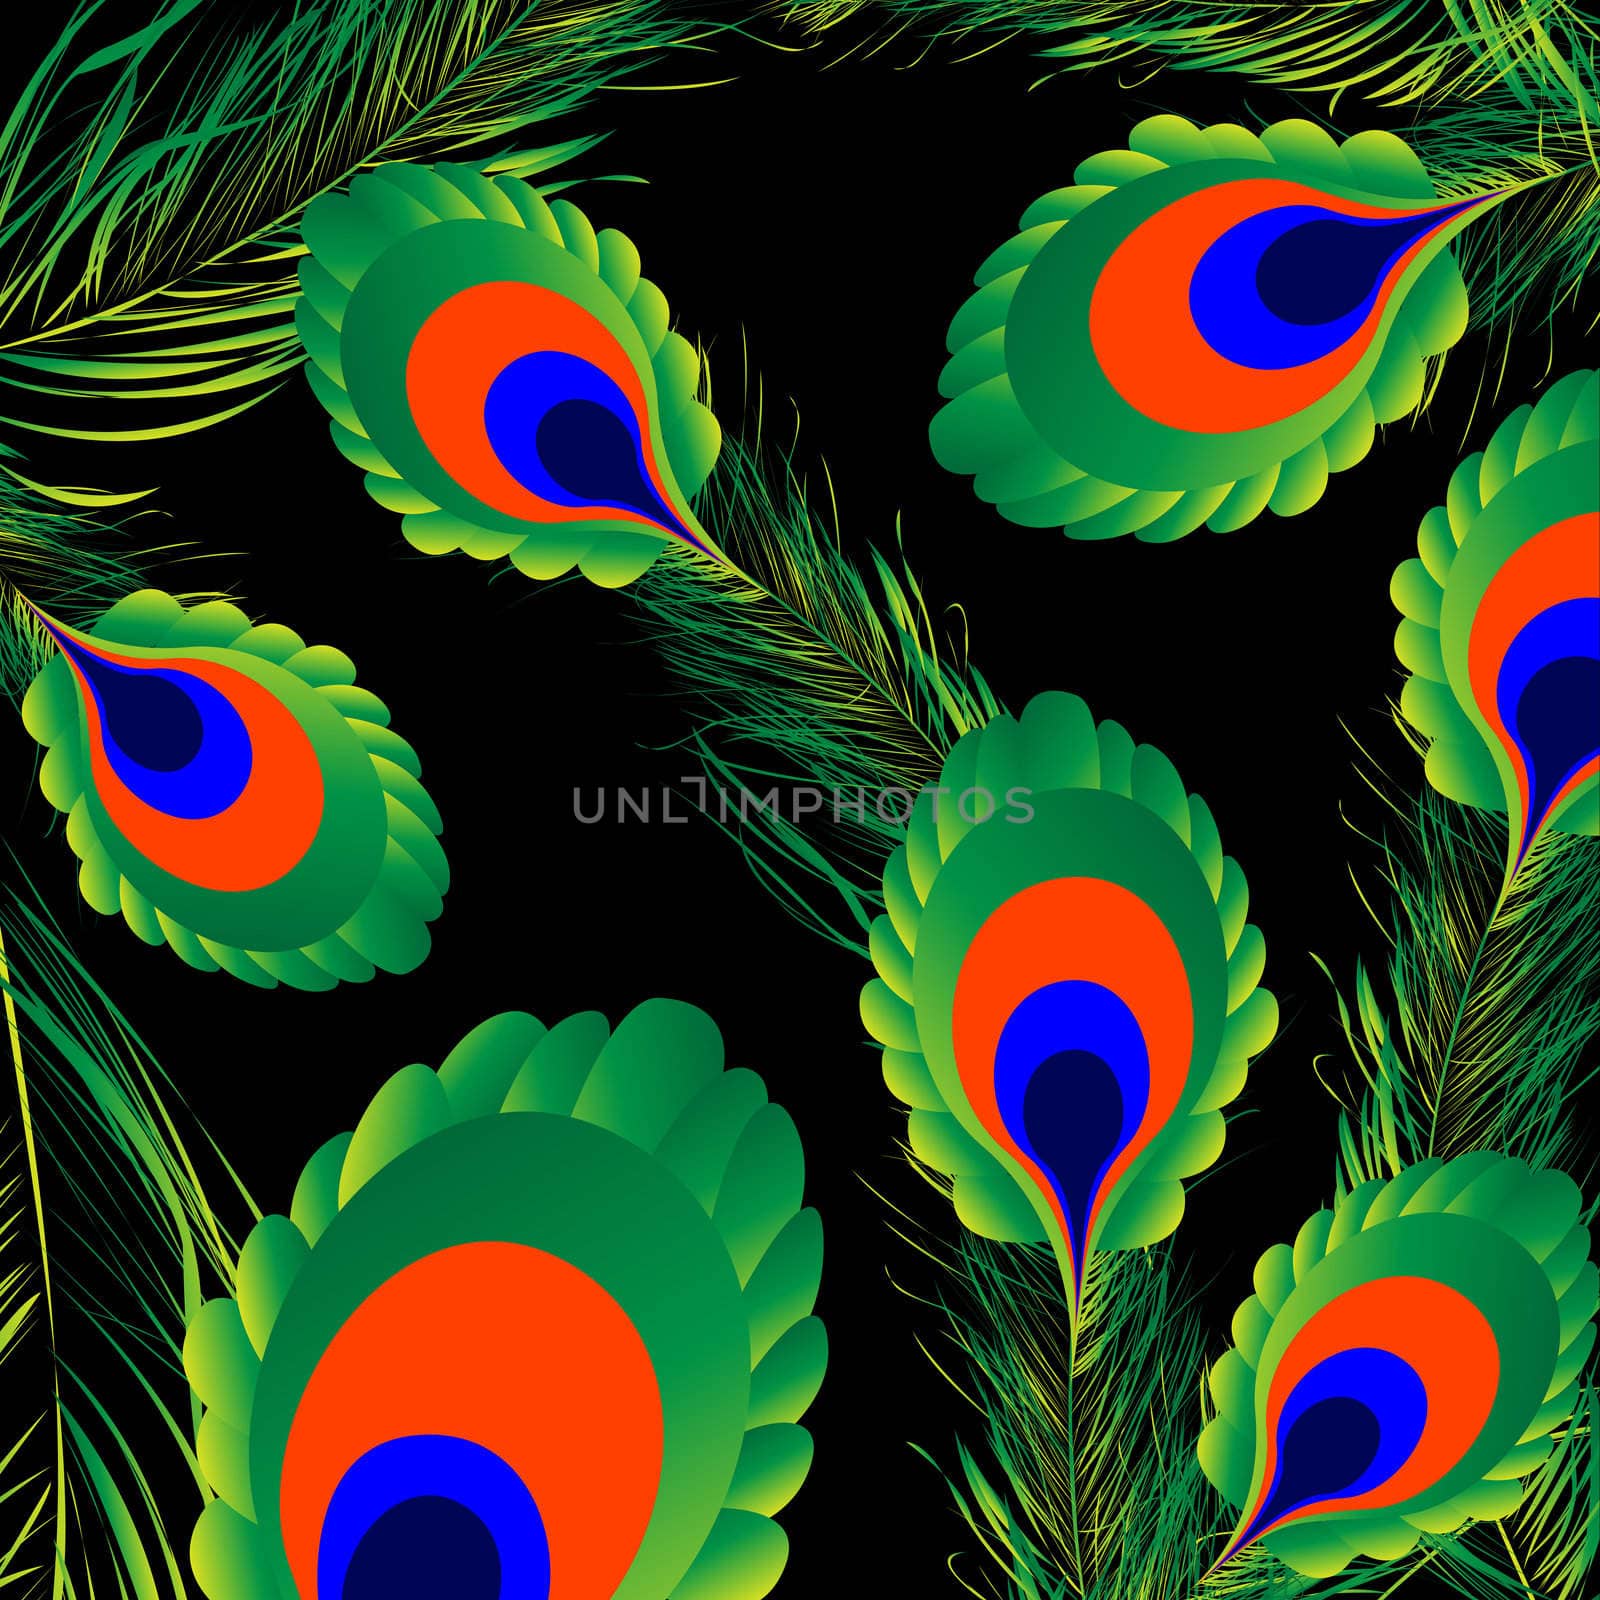 Peacock feathers background, abstract art illustration